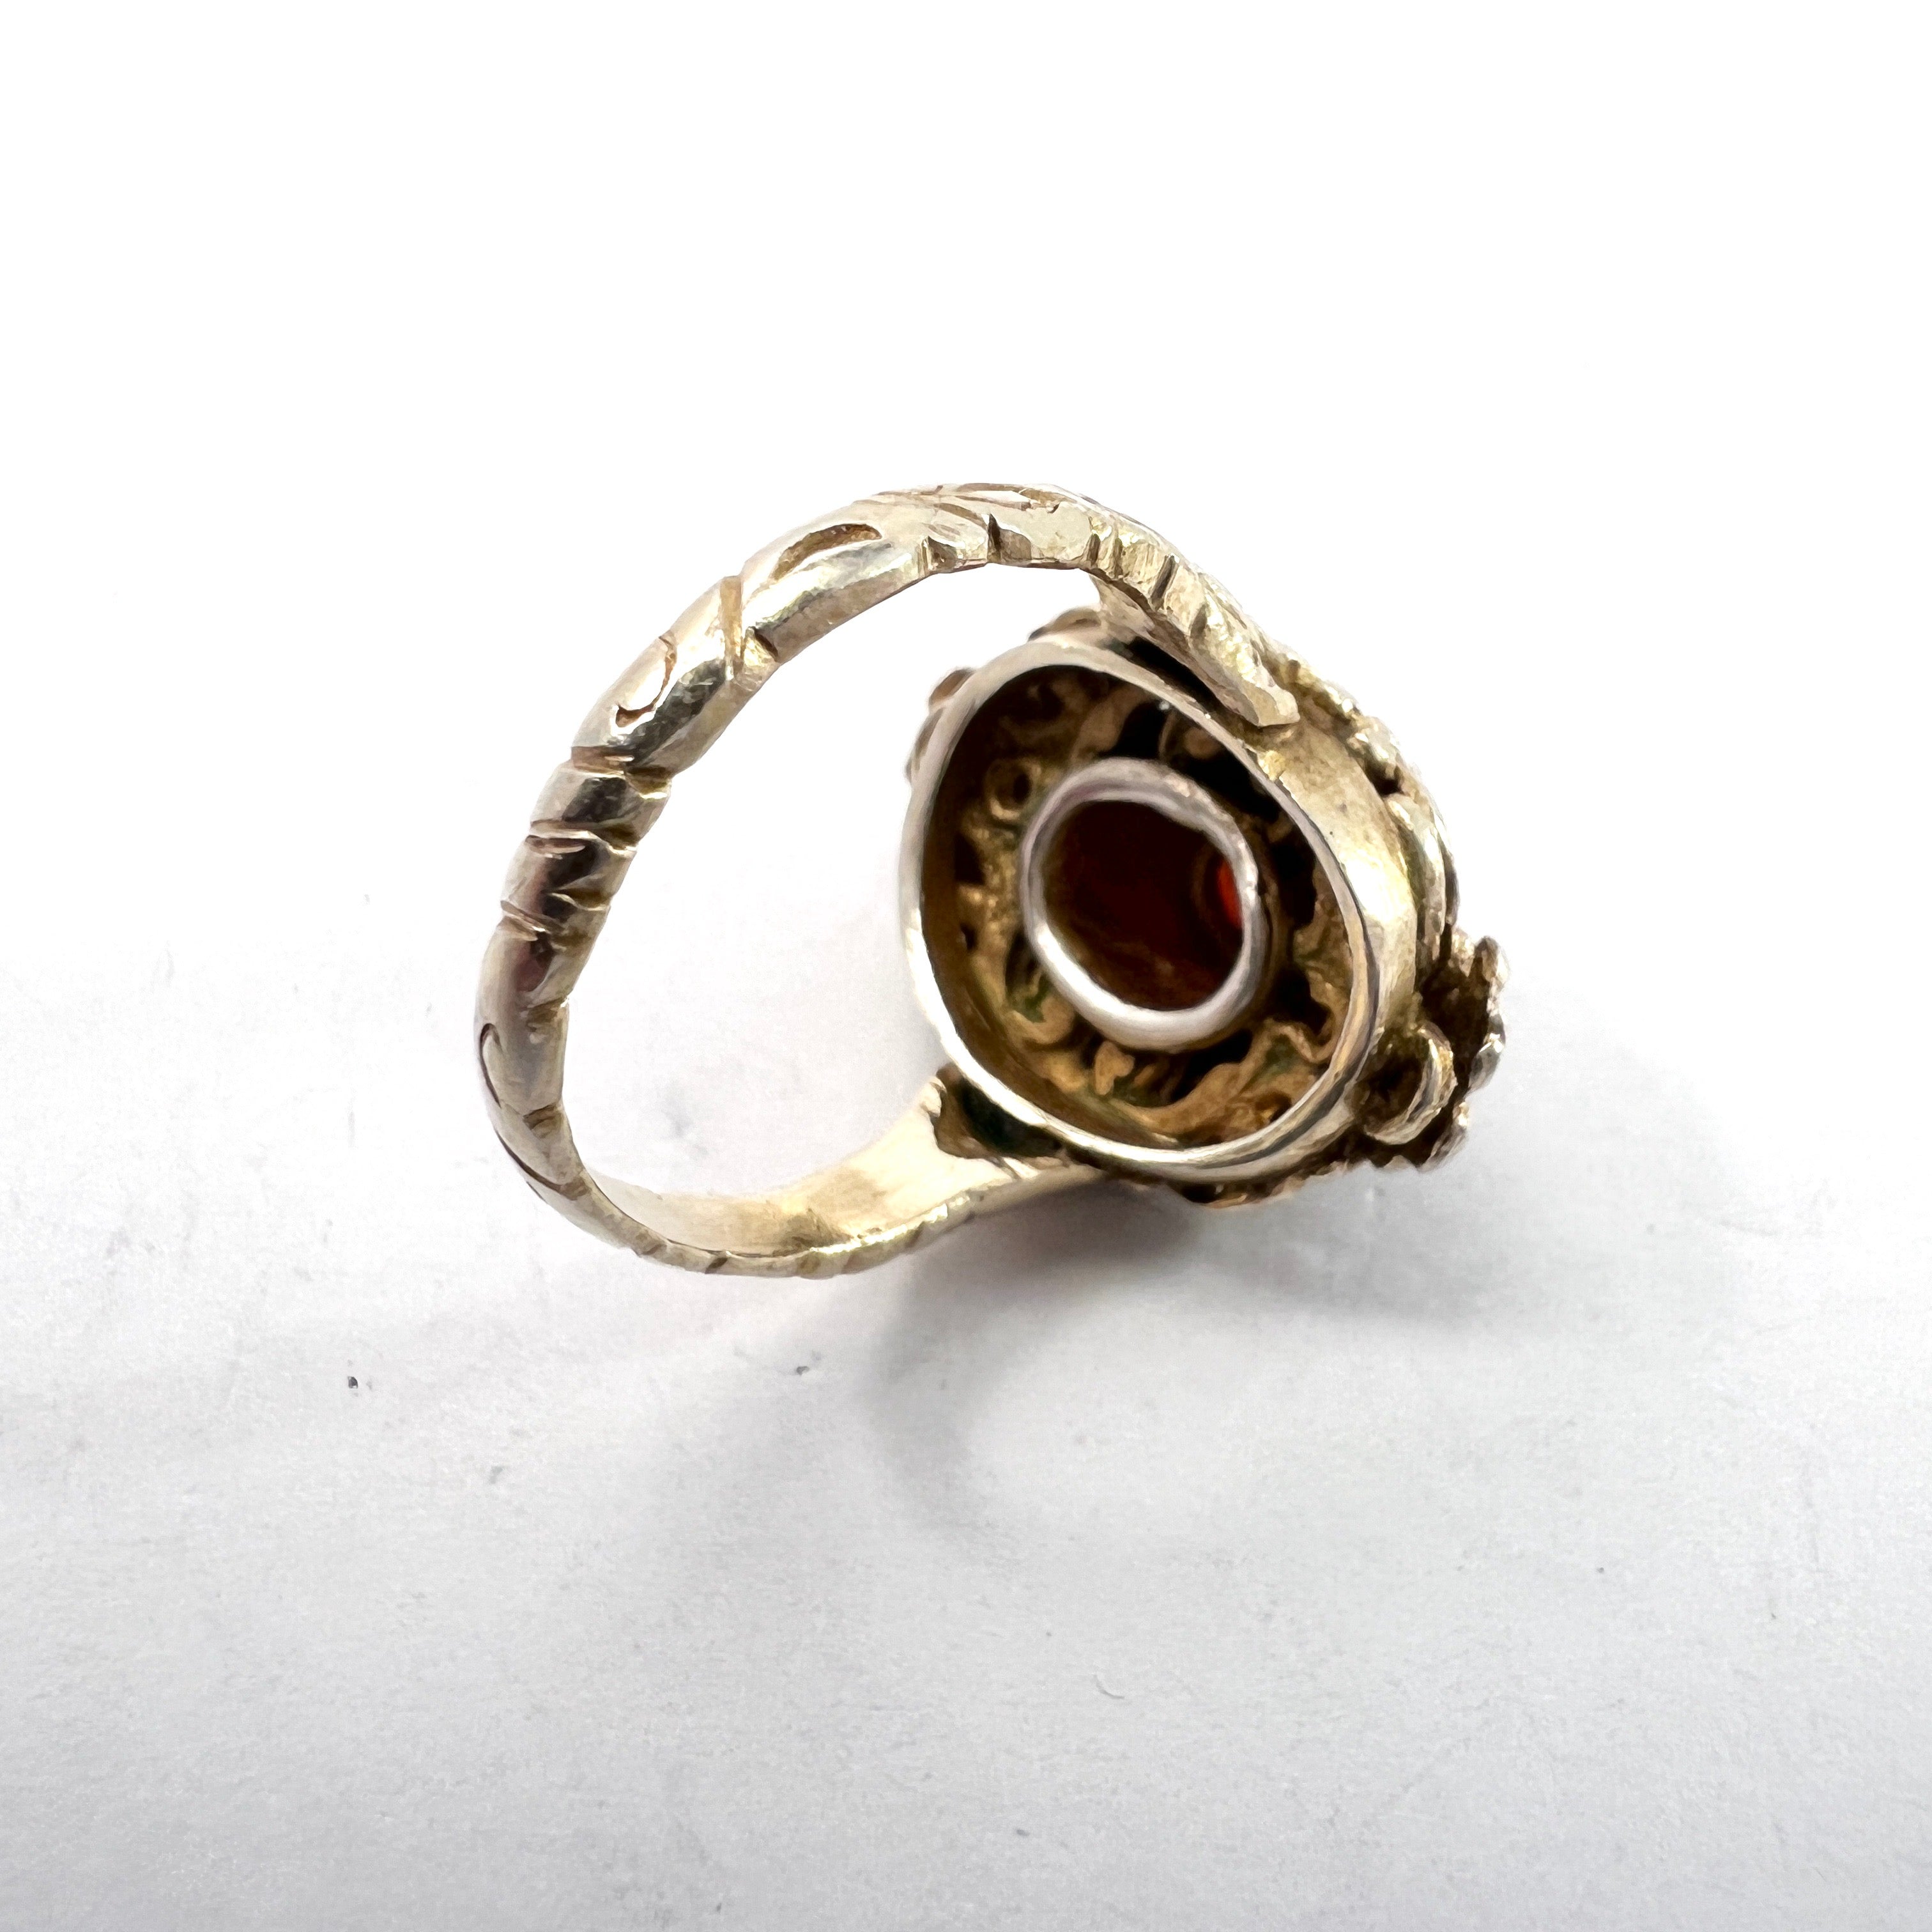 Austria-Hungary early 1900s. Antique Arts and Crafts Gilt 830 Silver Garnet Seed Pearl Enamel Ring.